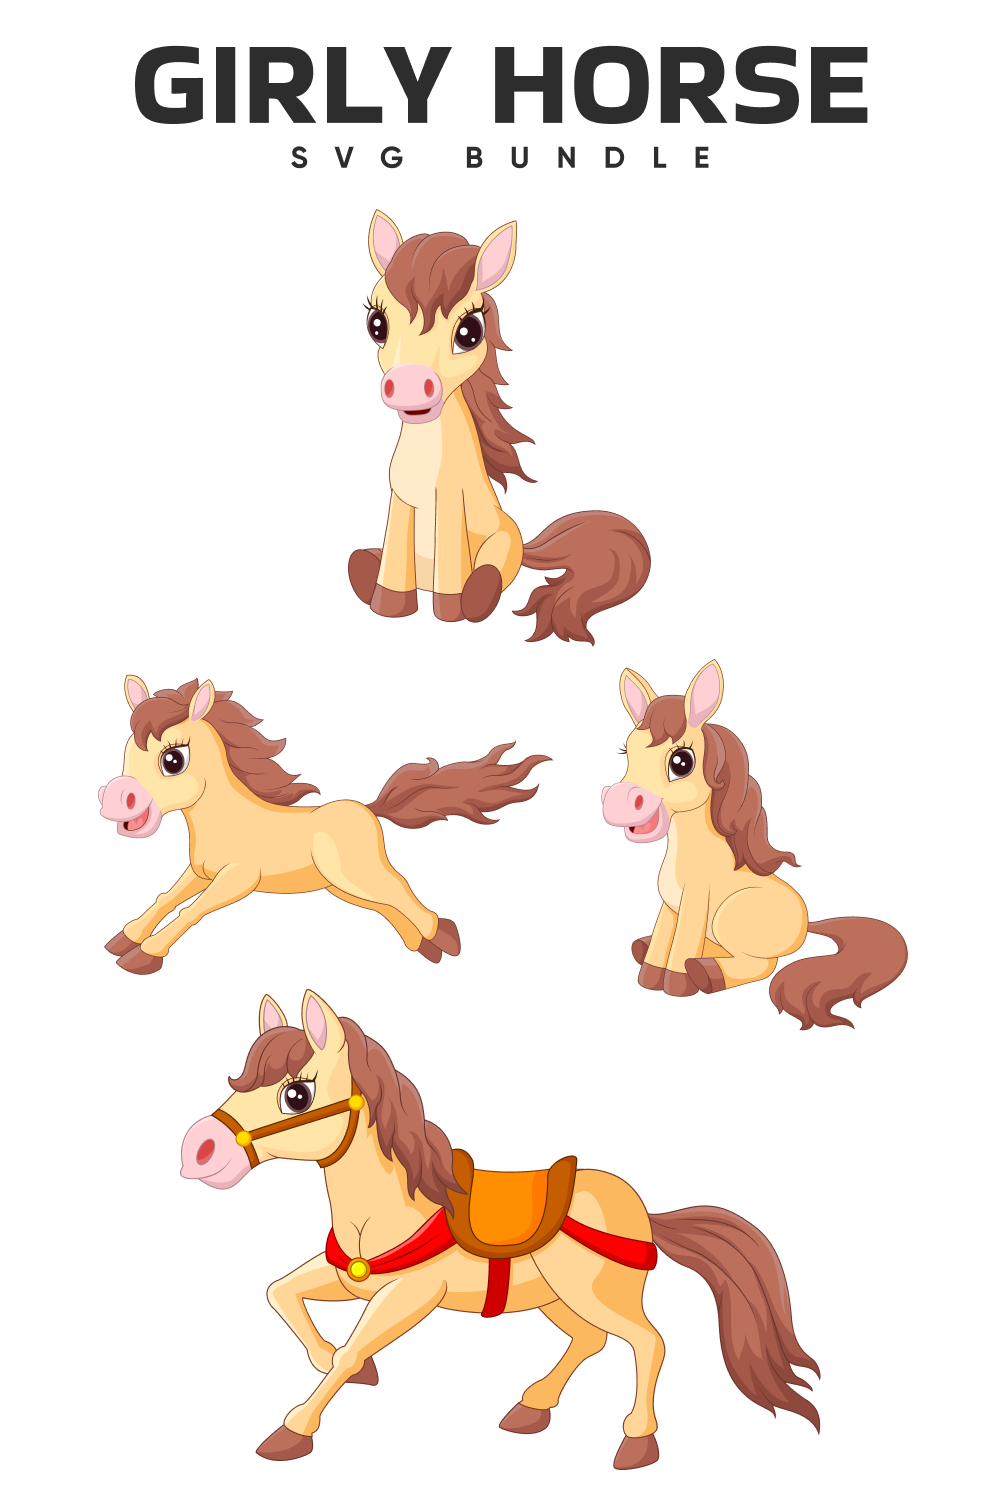 Cartoon horse is shown in four different poses.